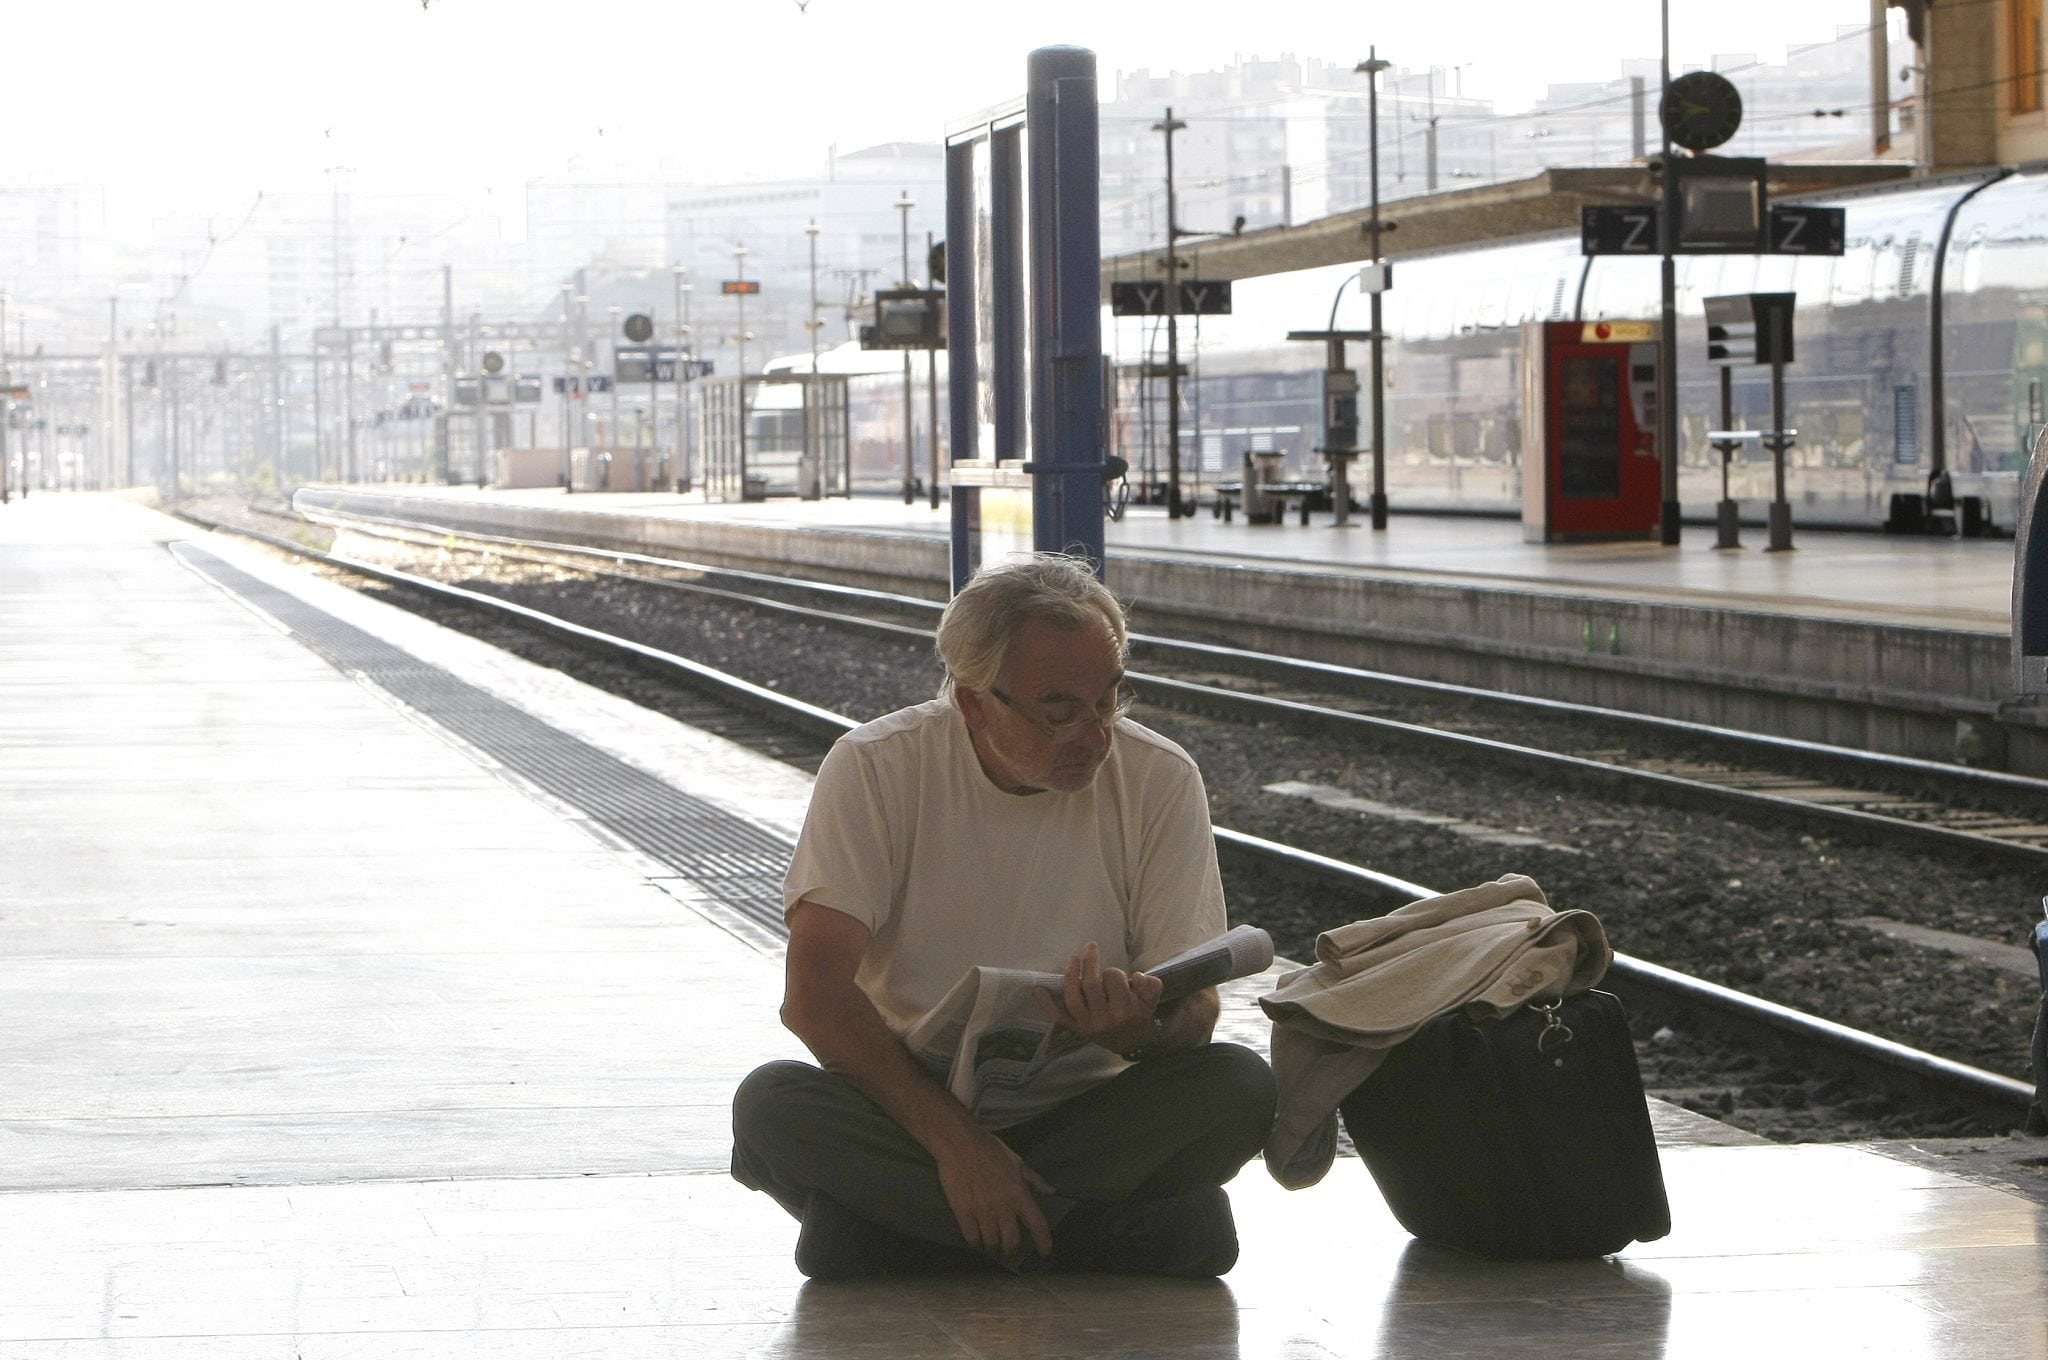 Passenger sits on the ground and reads a newspaper in front of an empty platform, at Saint-Charles railway station, in Marseille, southern France, Thursday June 13, 2013, as French rail workers are on strike to protest a reorganization of the national rail and train companies. 